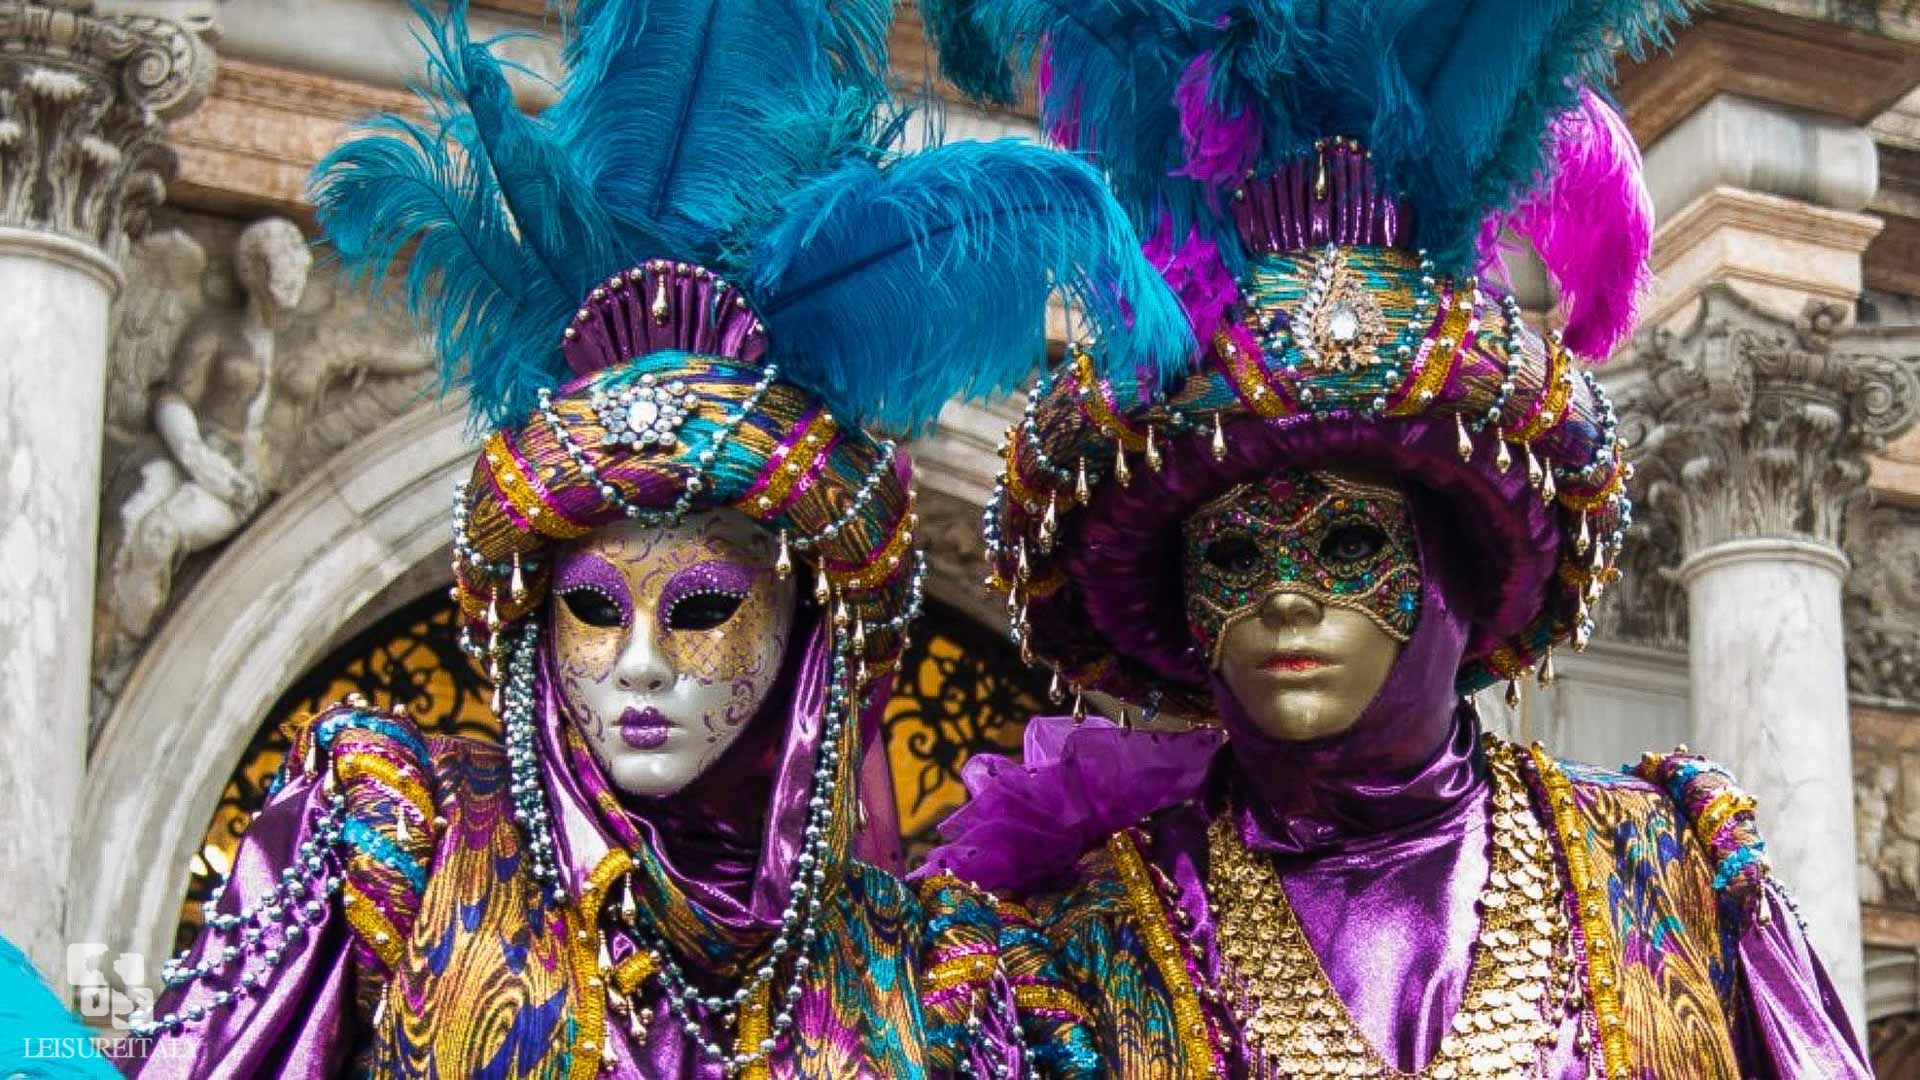 Venice Carnival History, Legends And Traditions Leisure Italy